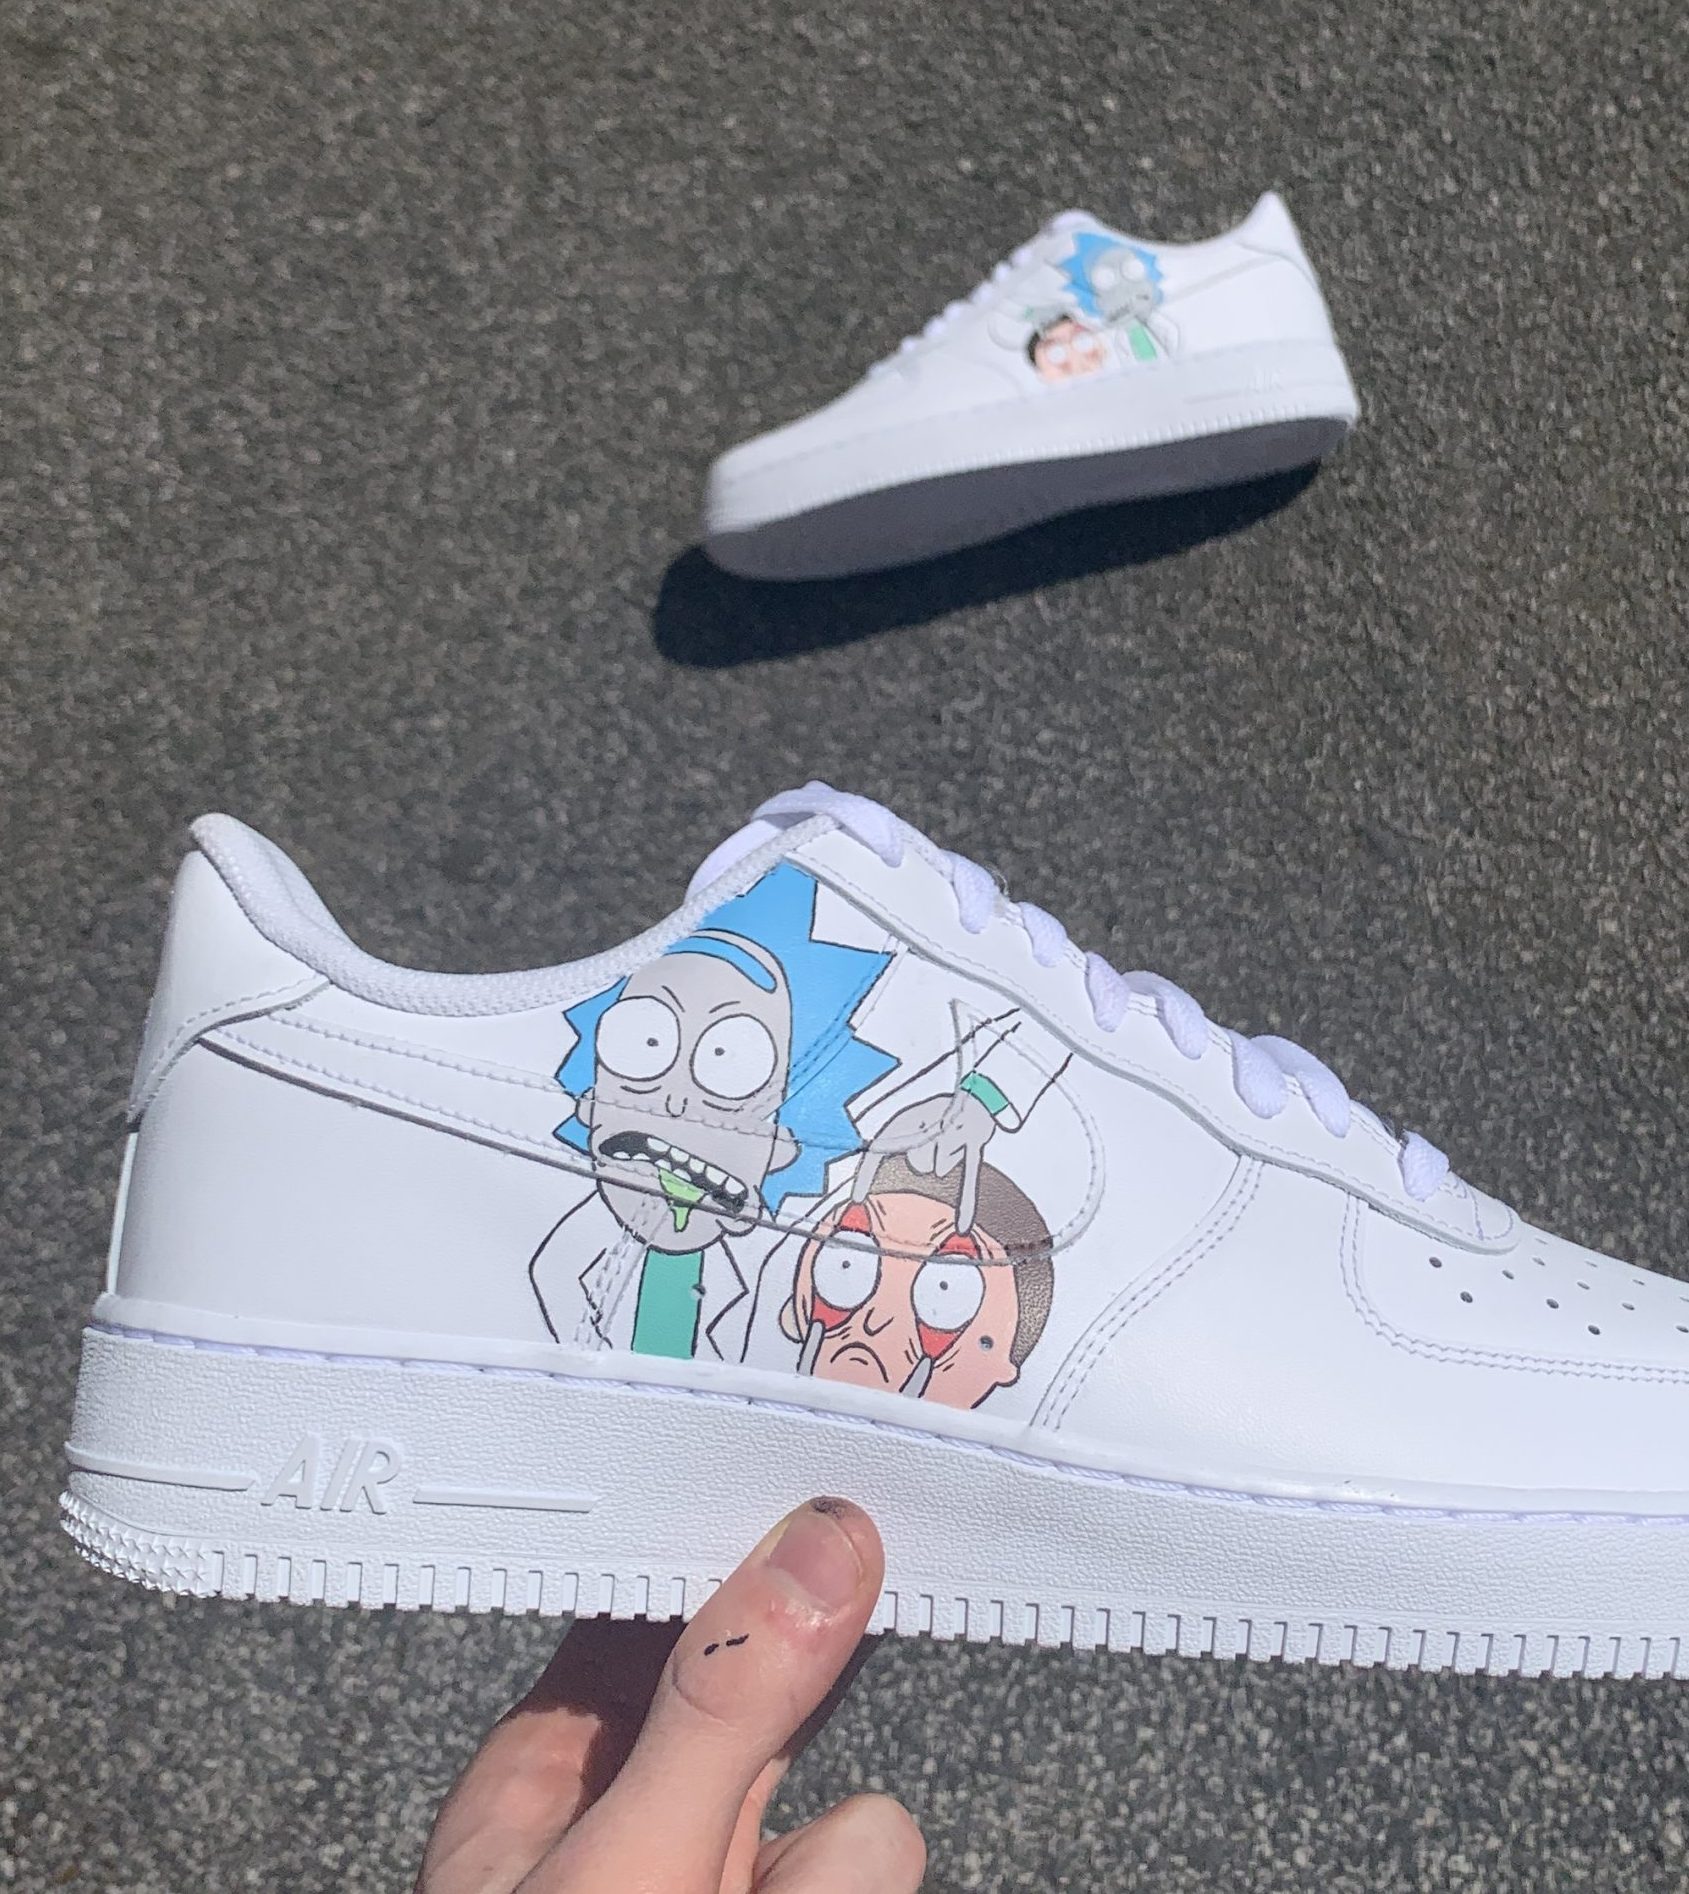 RICK AND MORTY AIR FORCE – Sketch Customs